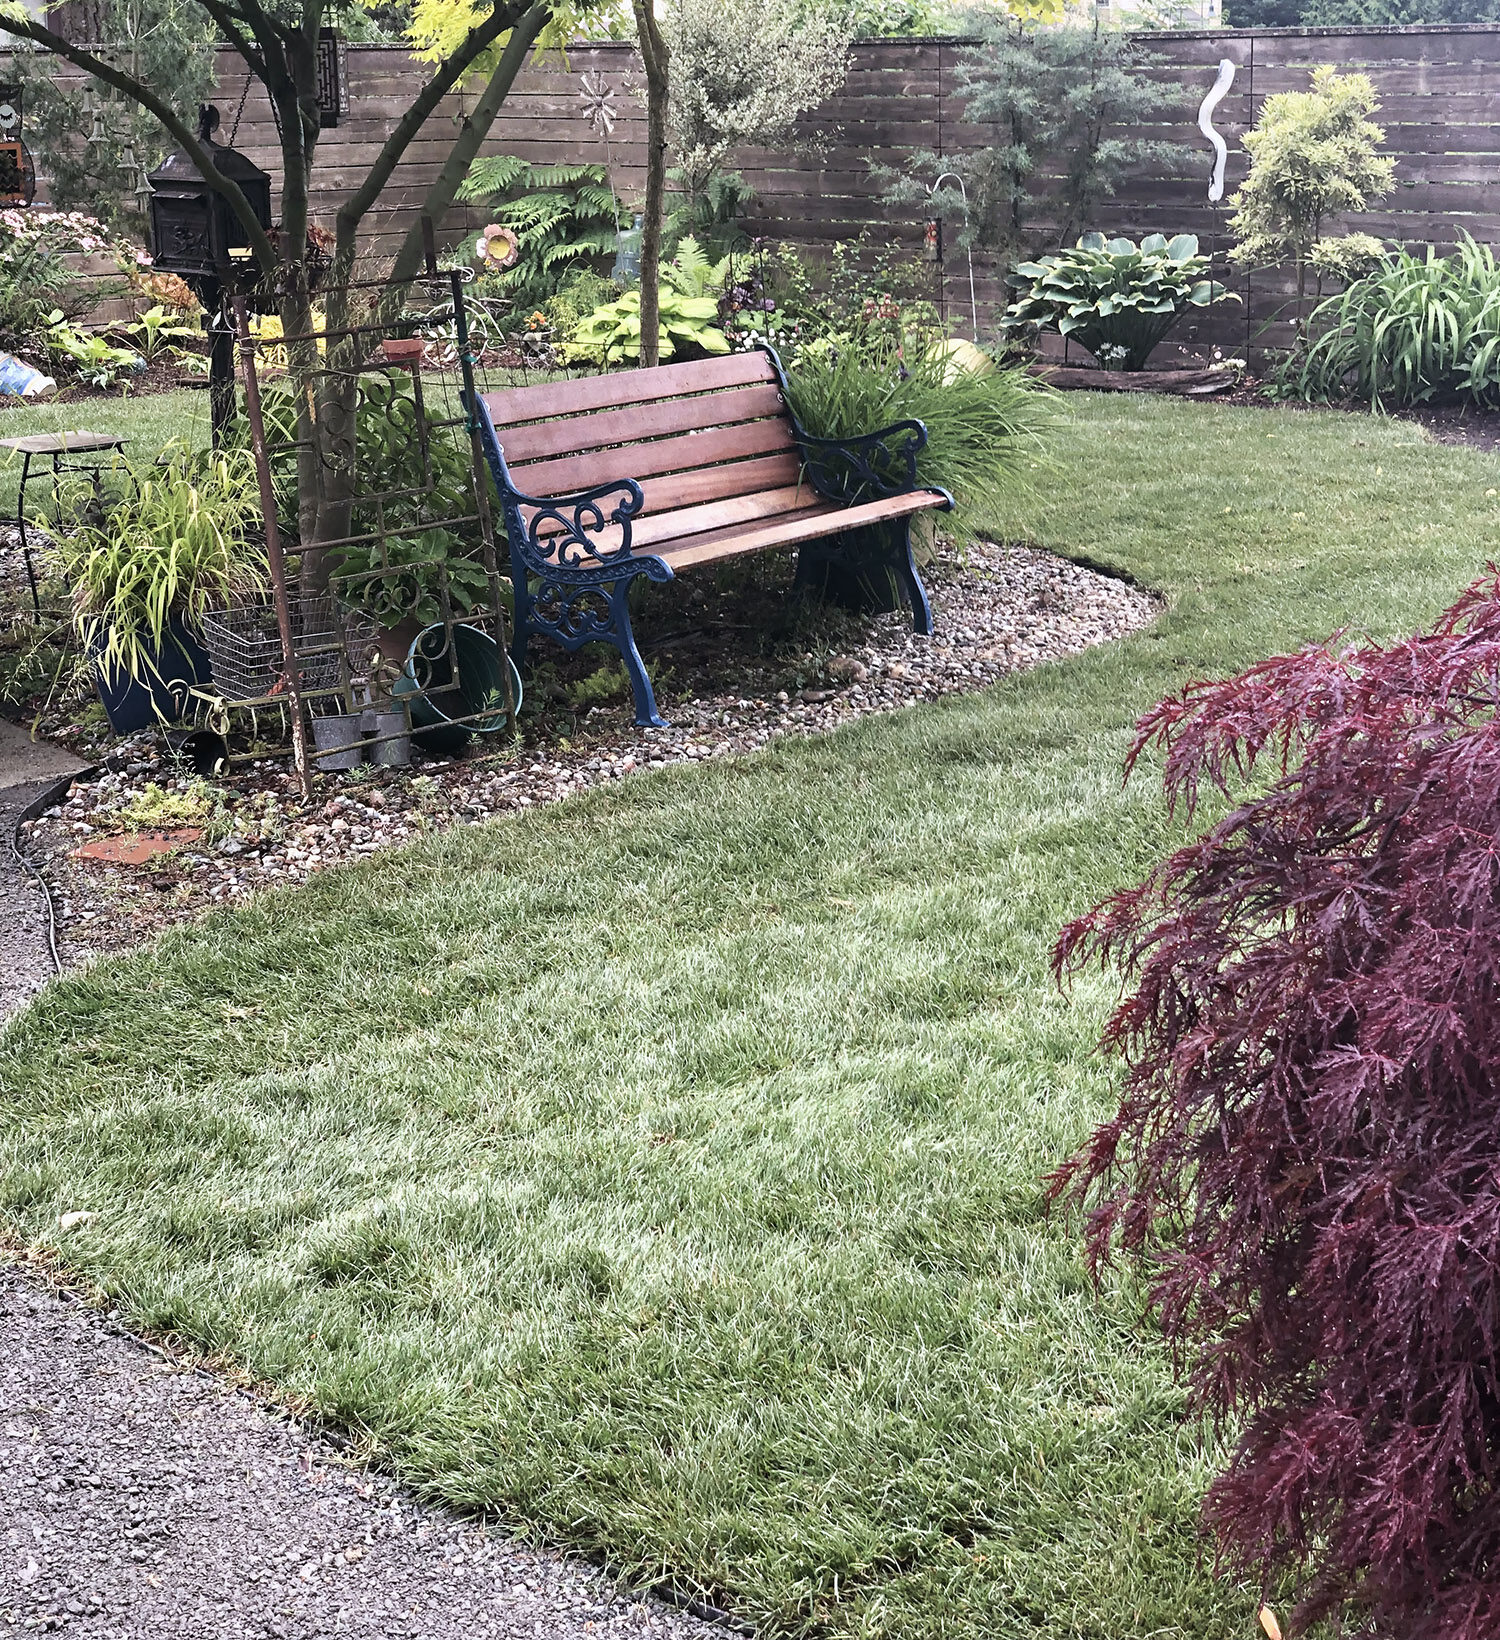 Photo of a bench in a manicured lawn, with shrubbery.